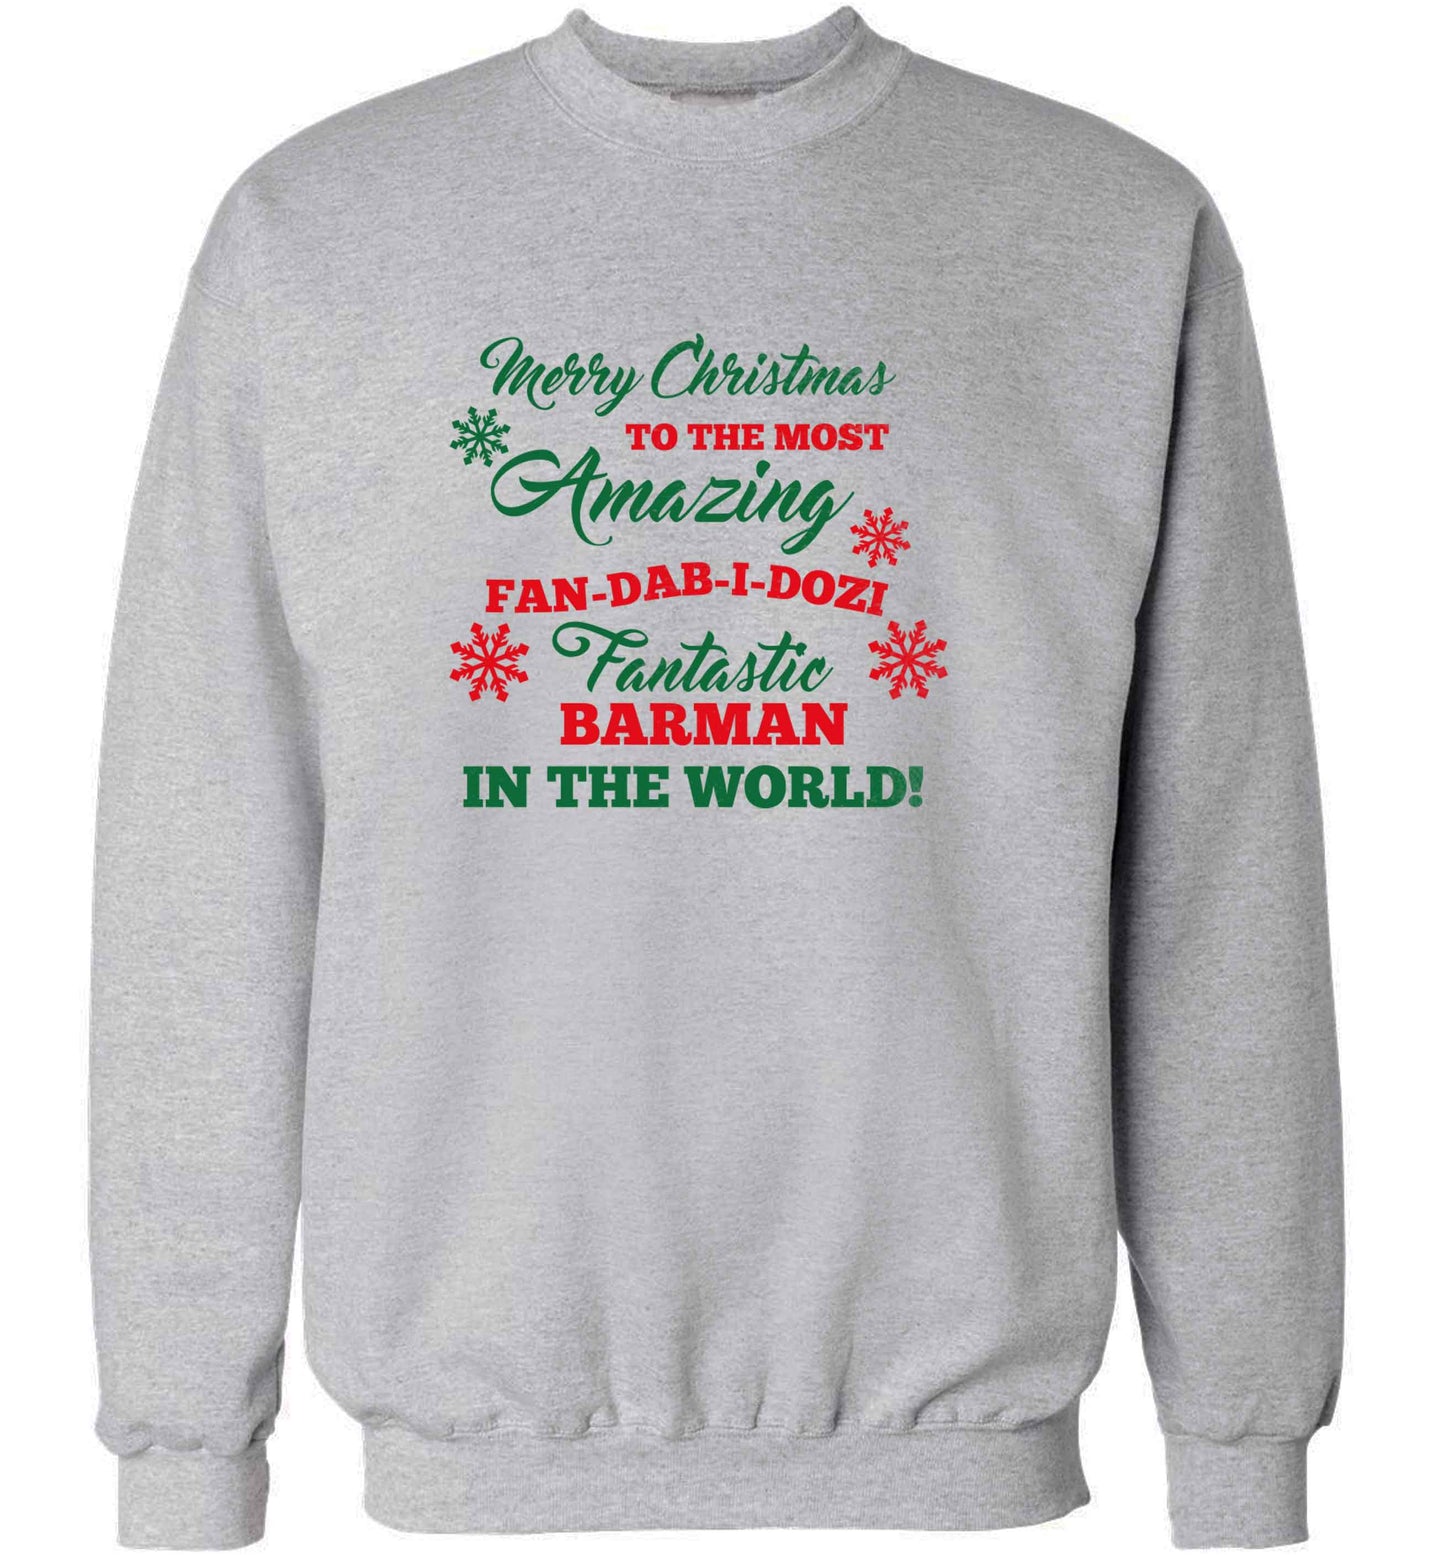 Merry Christmas to the most amazing barman in the world! adult's unisex grey sweater 2XL